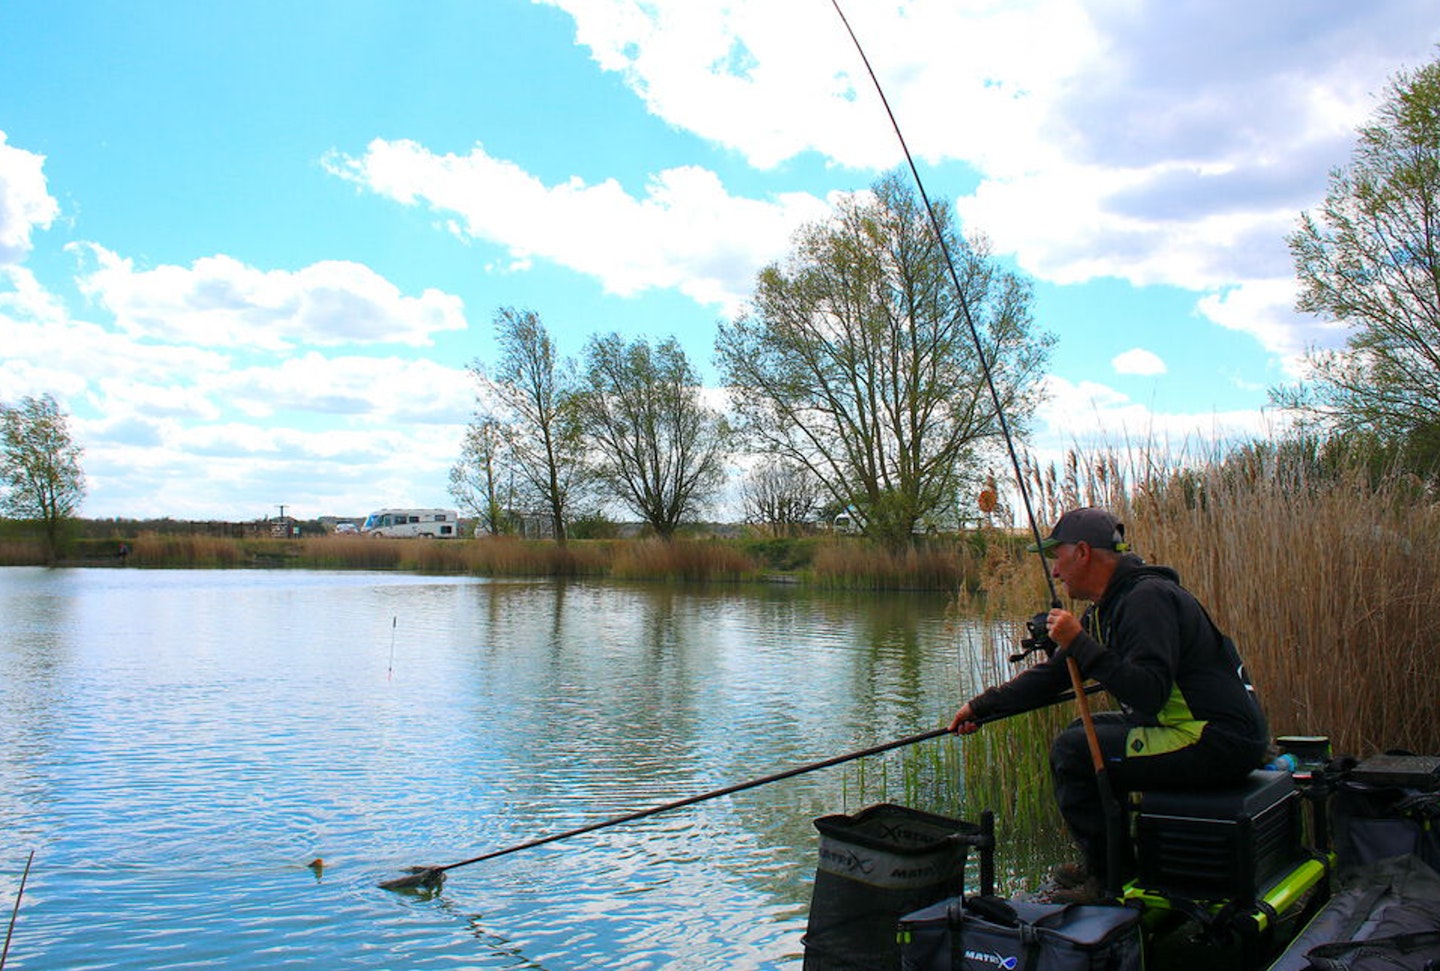 You can have an action-packed day on the waggler